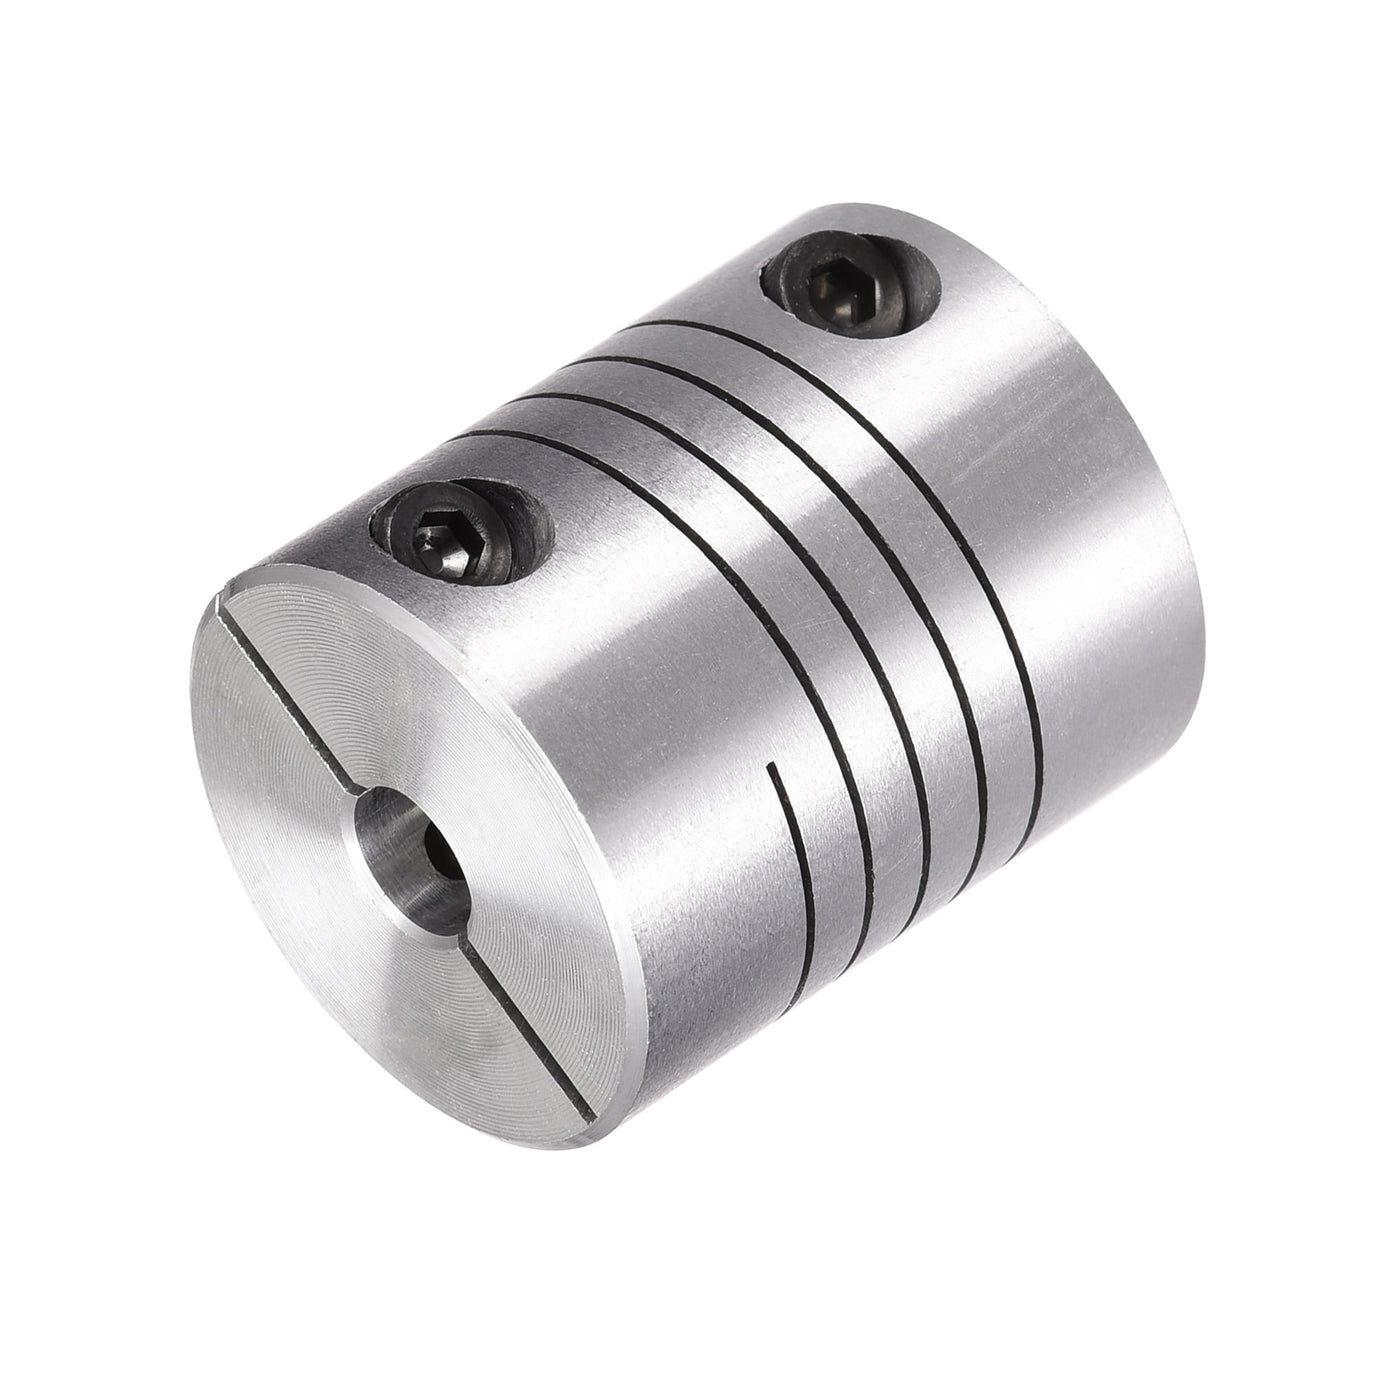 uxcell Uxcell 2PCS Motor Shaft 6.35mm to 6.35mm Helical Beam Coupler Coupling D20L25